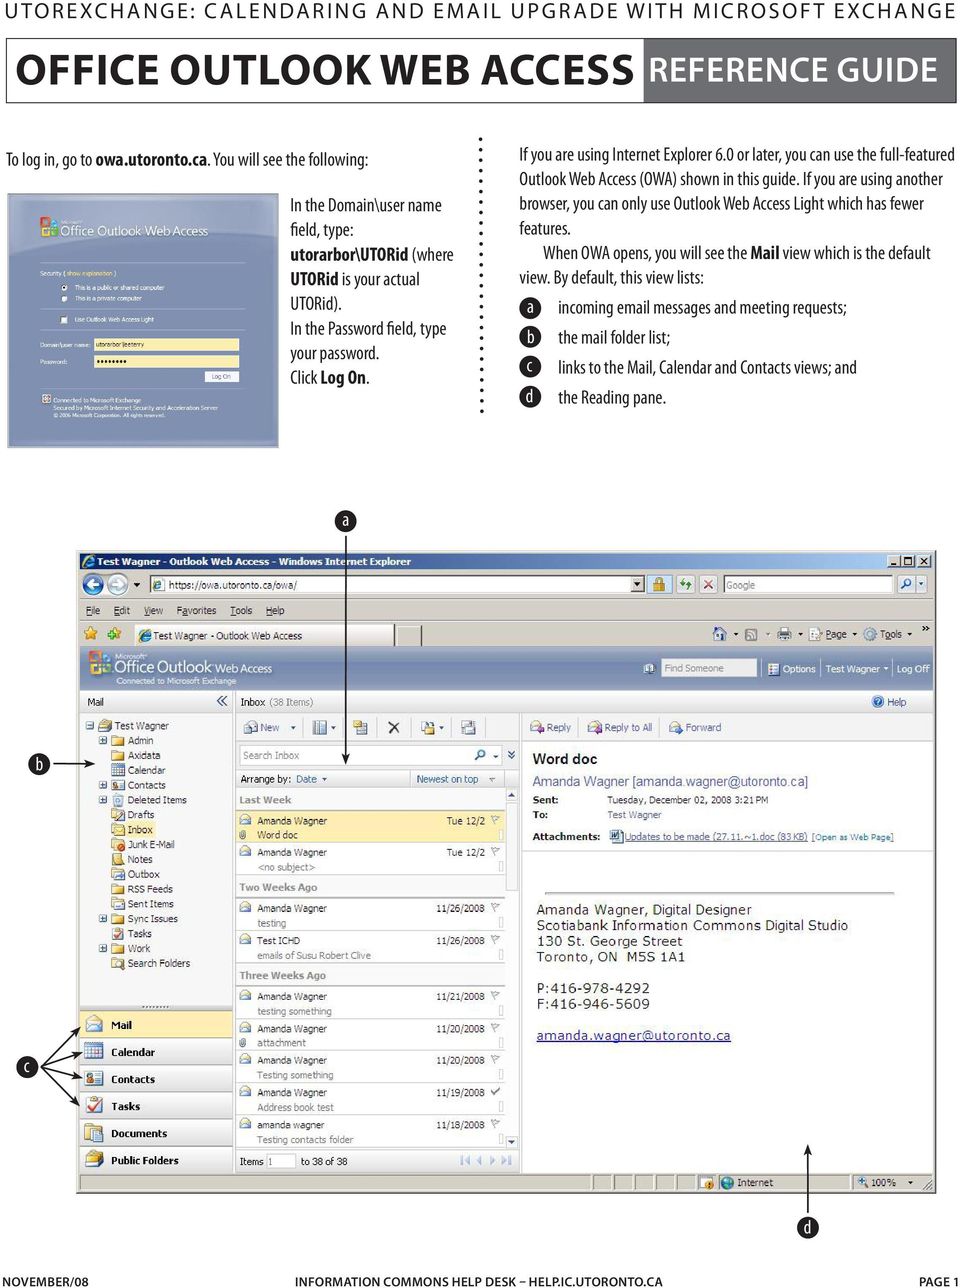 If you are using Internet Explorer 6.0 or later, you can use the full-featured Outlook Web Access (OWA) shown in this guide.